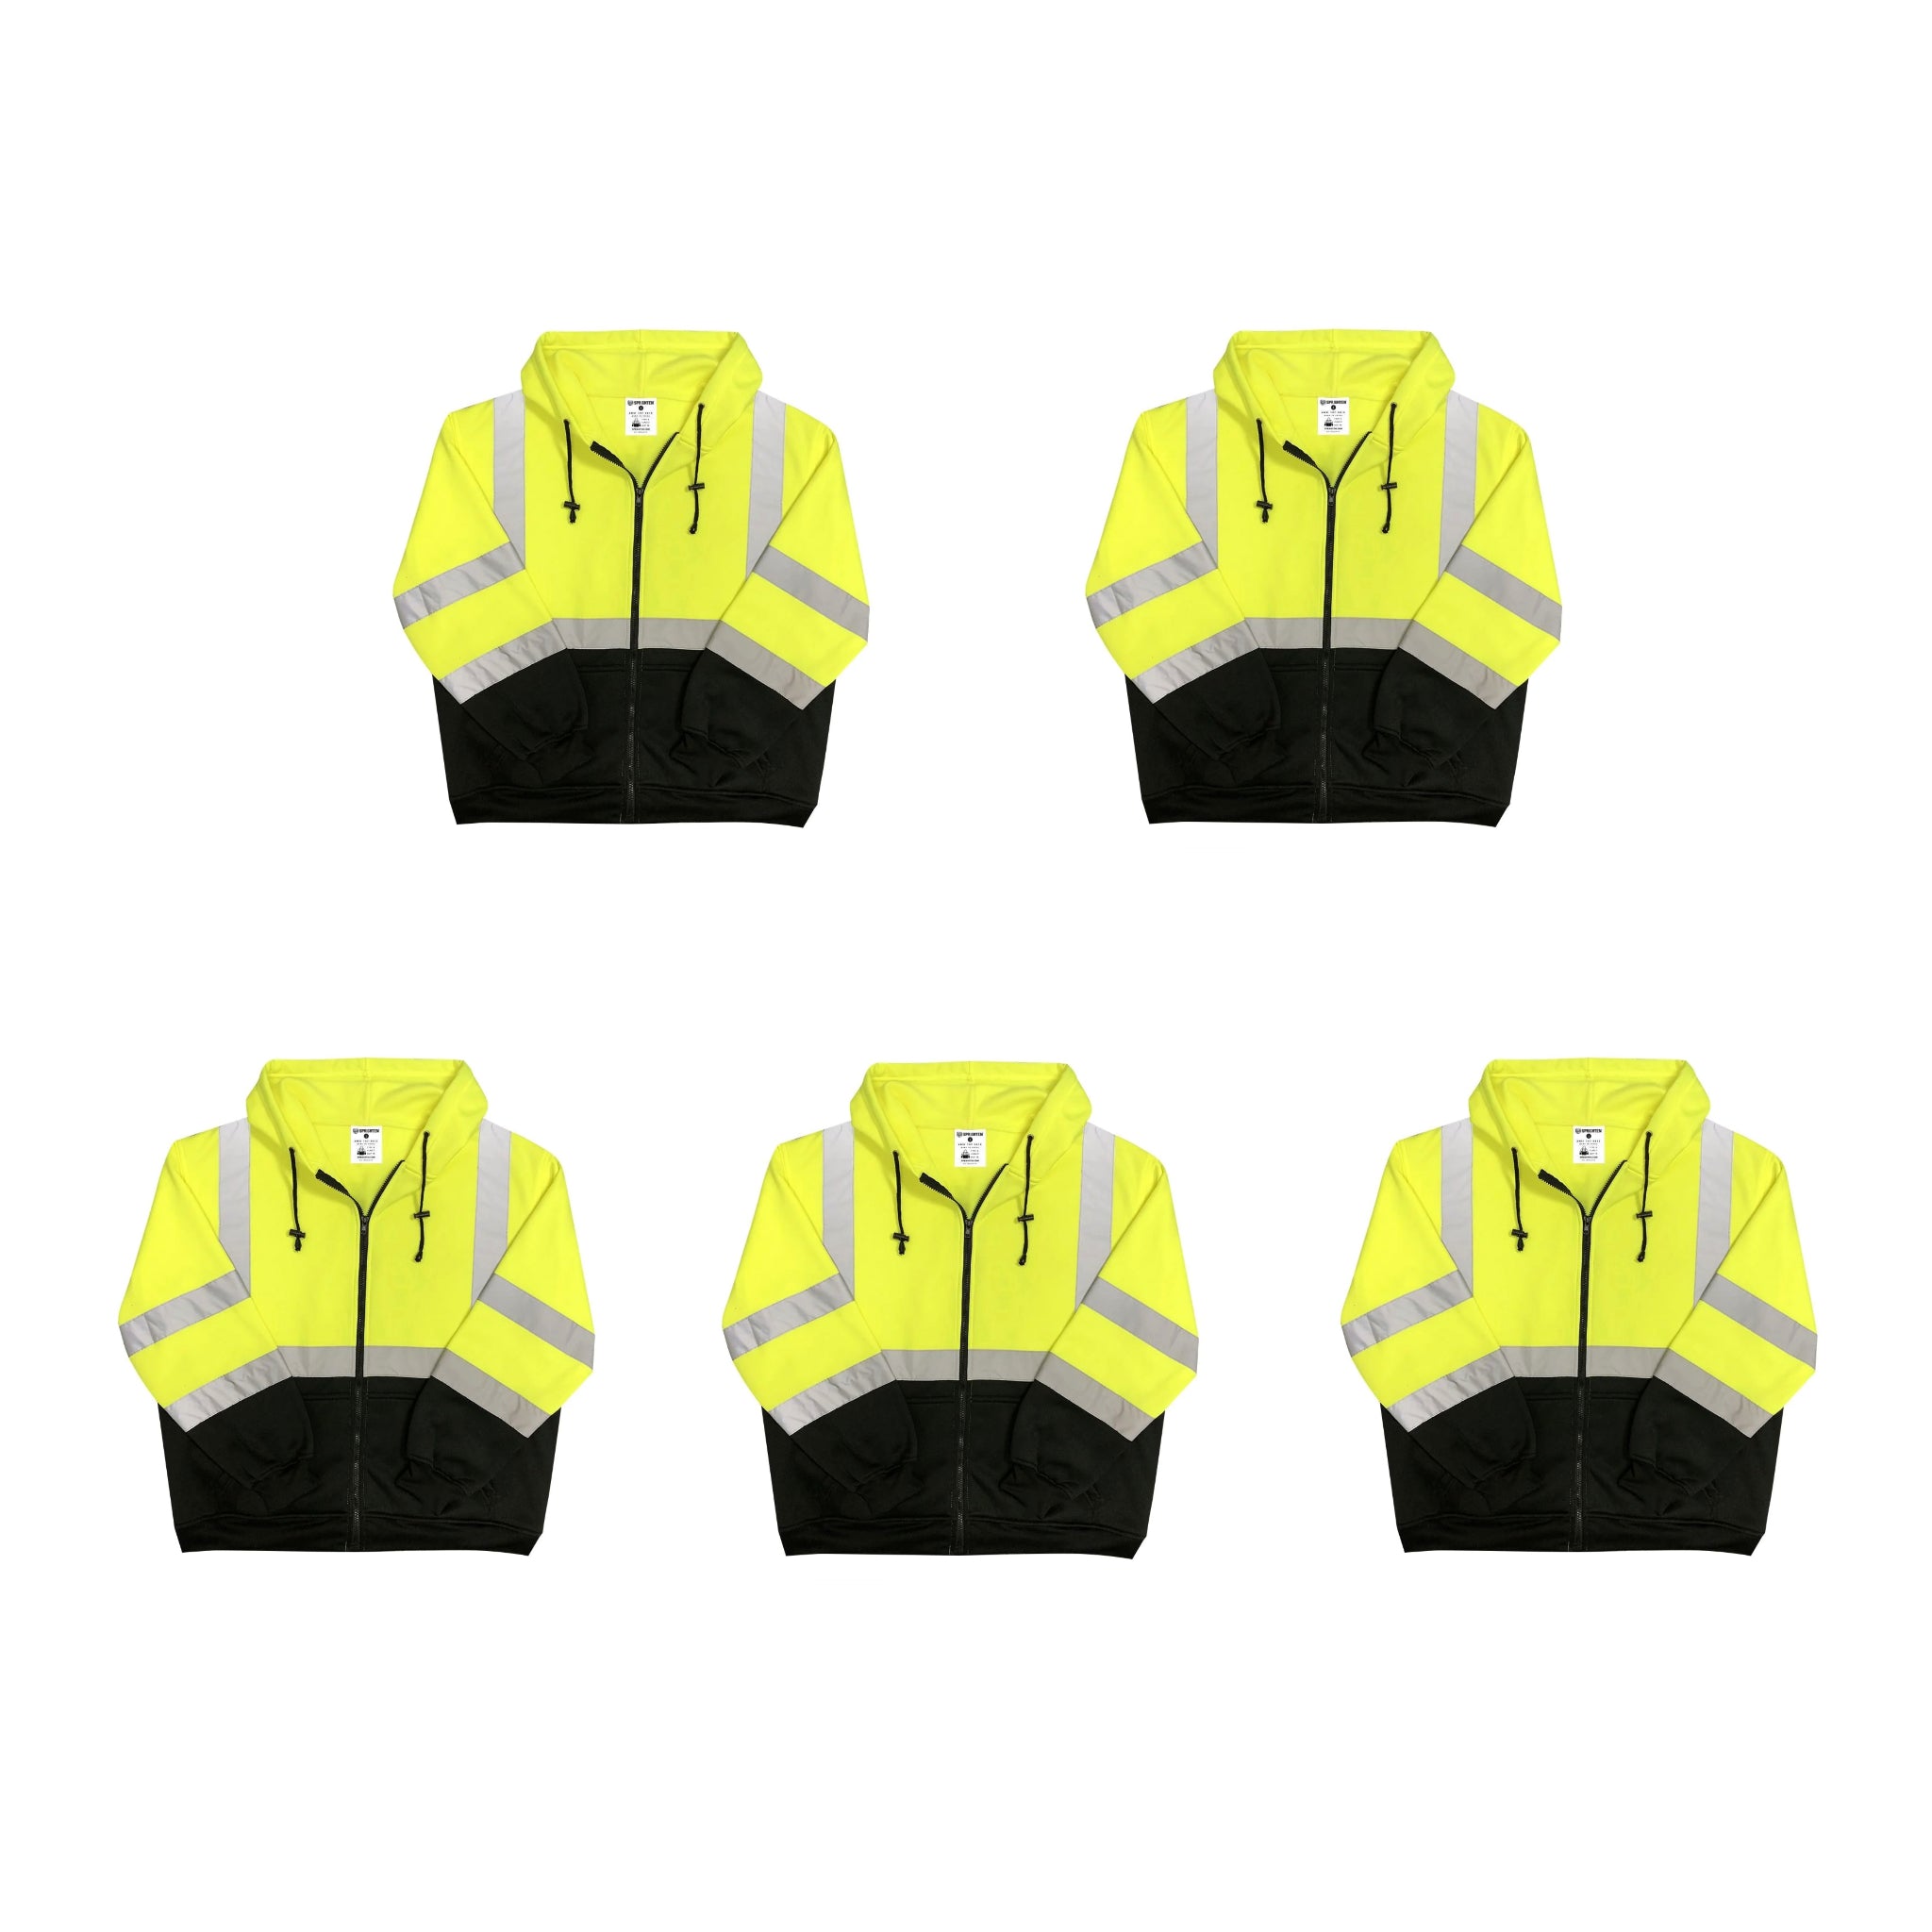 Safety Main 05LWJYB Lightweight Jacket, Class 3, Hi-Vis Yellow with Black Bottom, Pack of 5